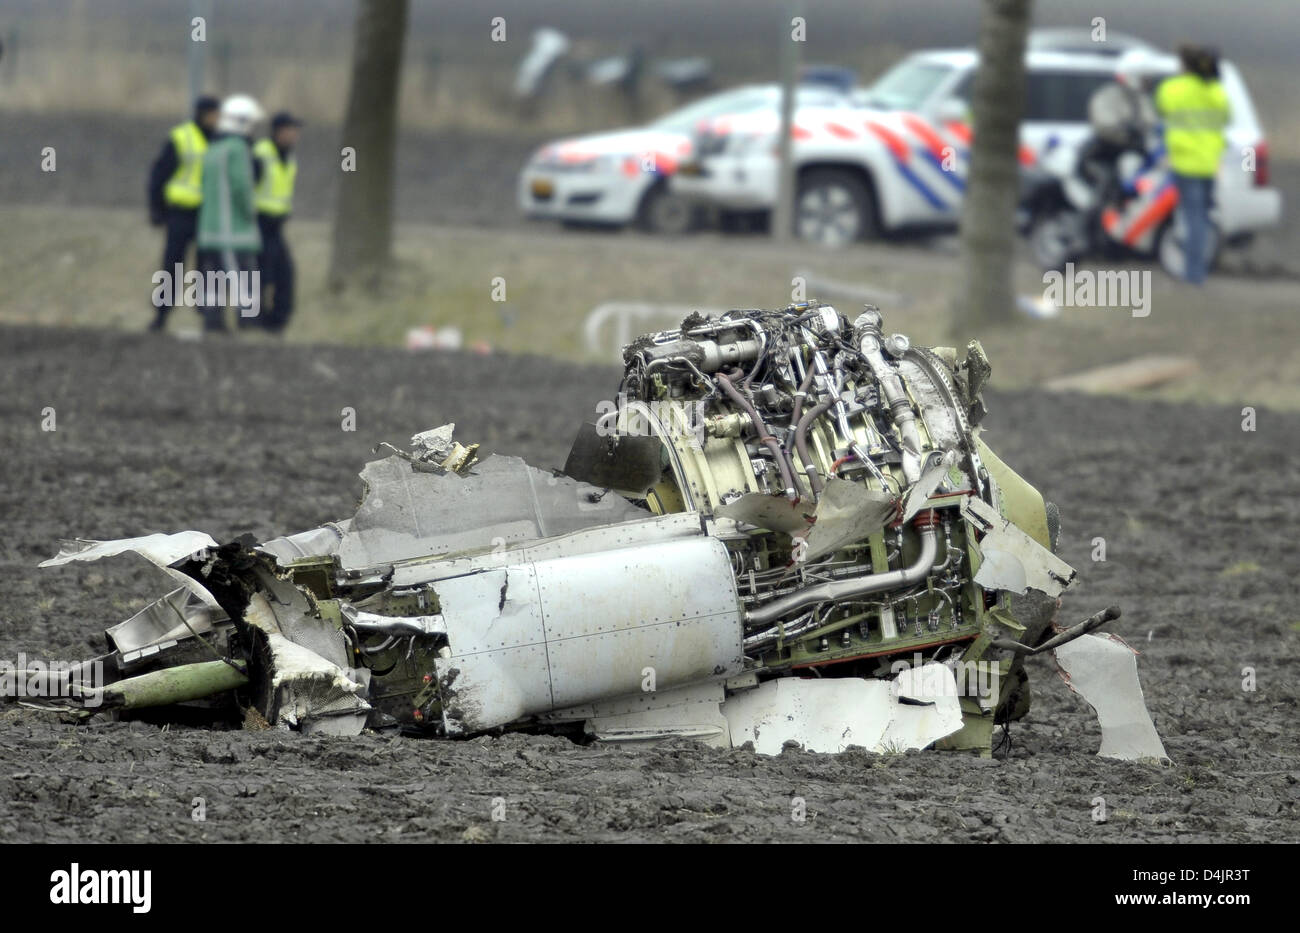 Debris of the crashed airplane lies in a field in Amsterdam, Netherlands, 25 February 2009. The plane by Turkish Airways has crashed on landing at Amsterdam?s Schiphol international airport, killing nine people and injuring more than 50 of the 134 passengers. The reasons for the crash are yet unclear. Photo: Achim Scheidemann Stock Photo